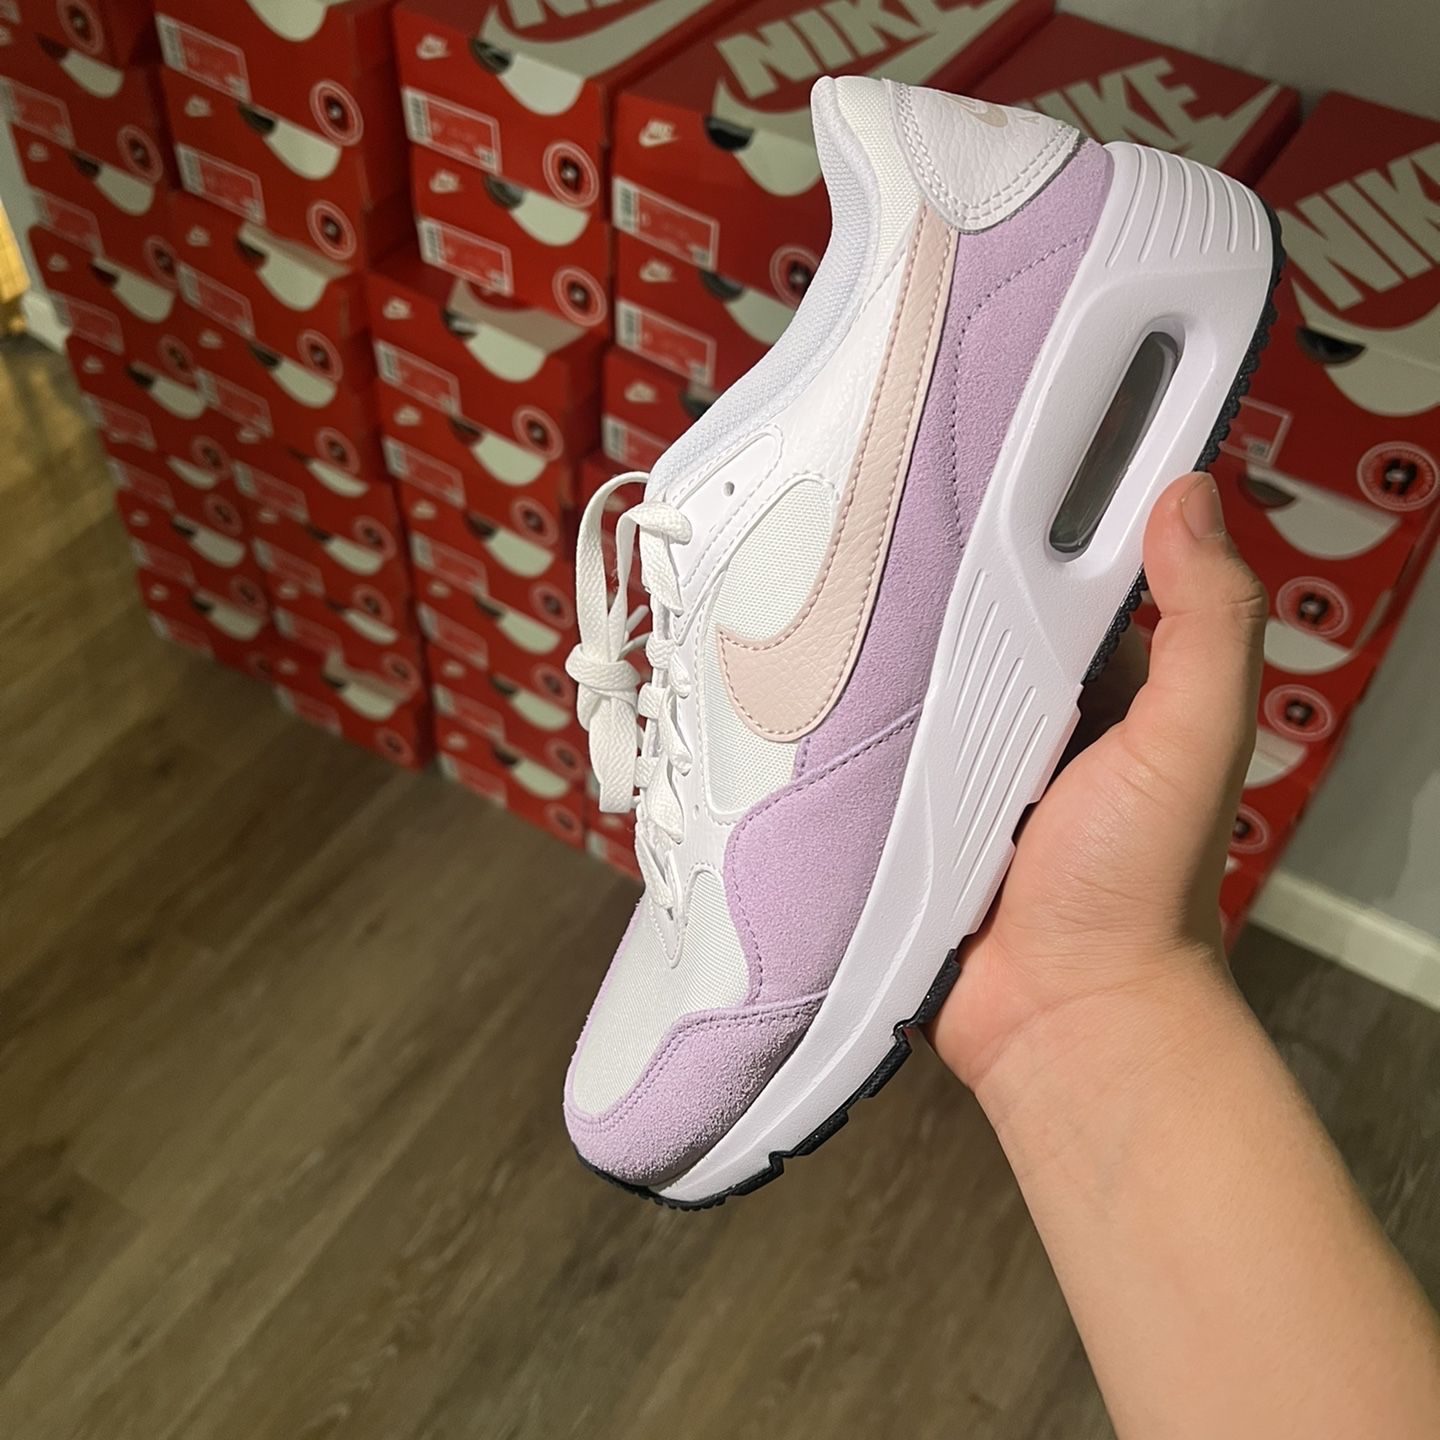 Nike Air Max SC White and Purple Sizes 6w - 10w Brand New 